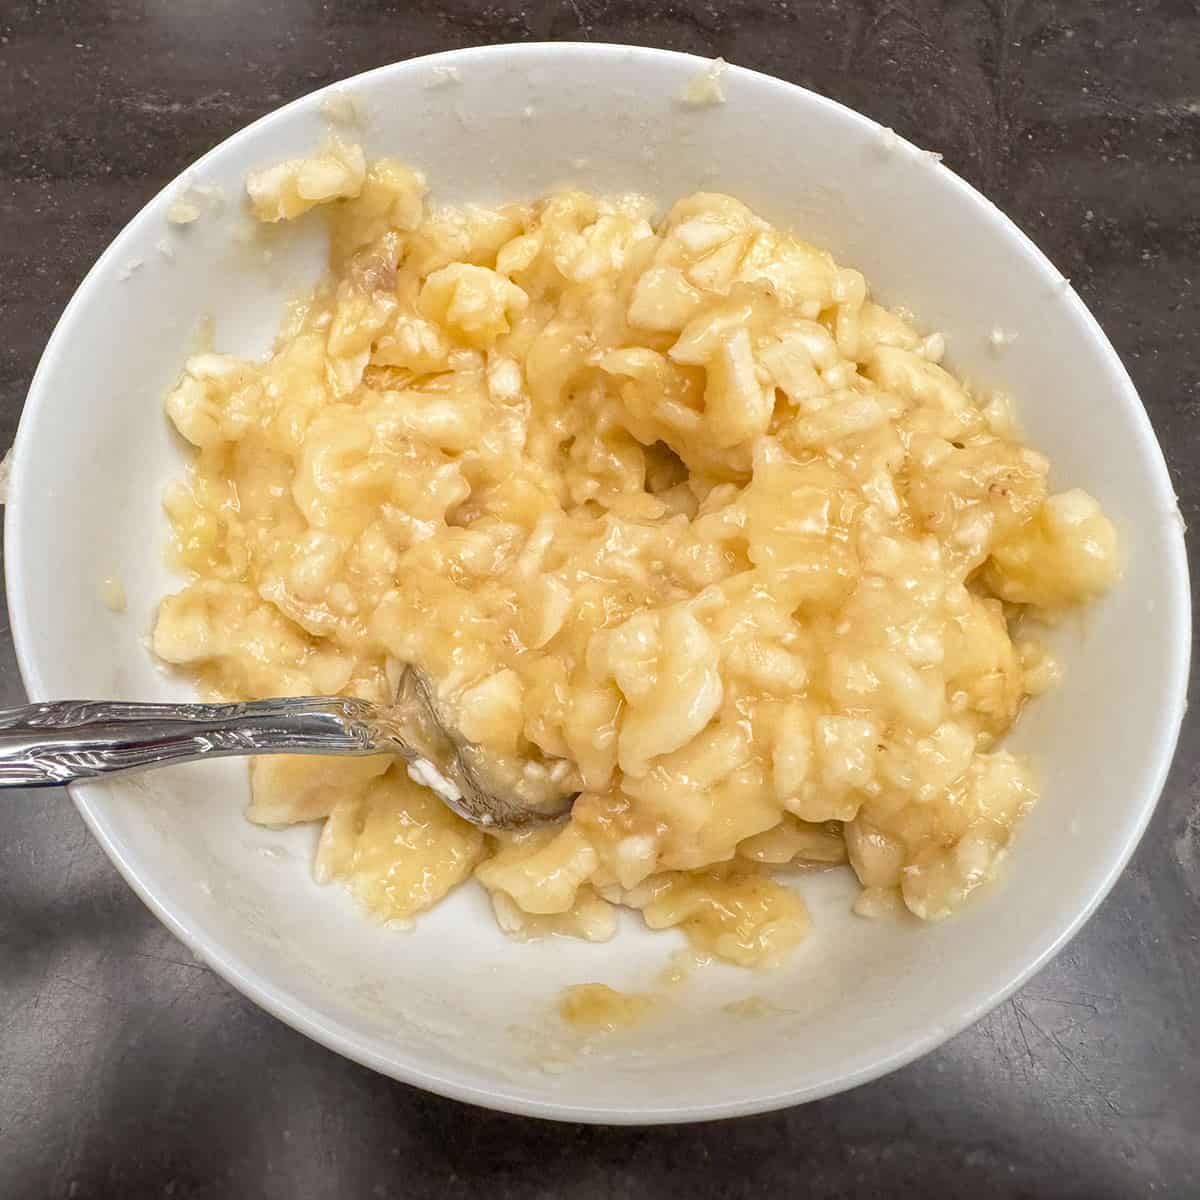 Banana slices mashed up with a fork in a small bowl.